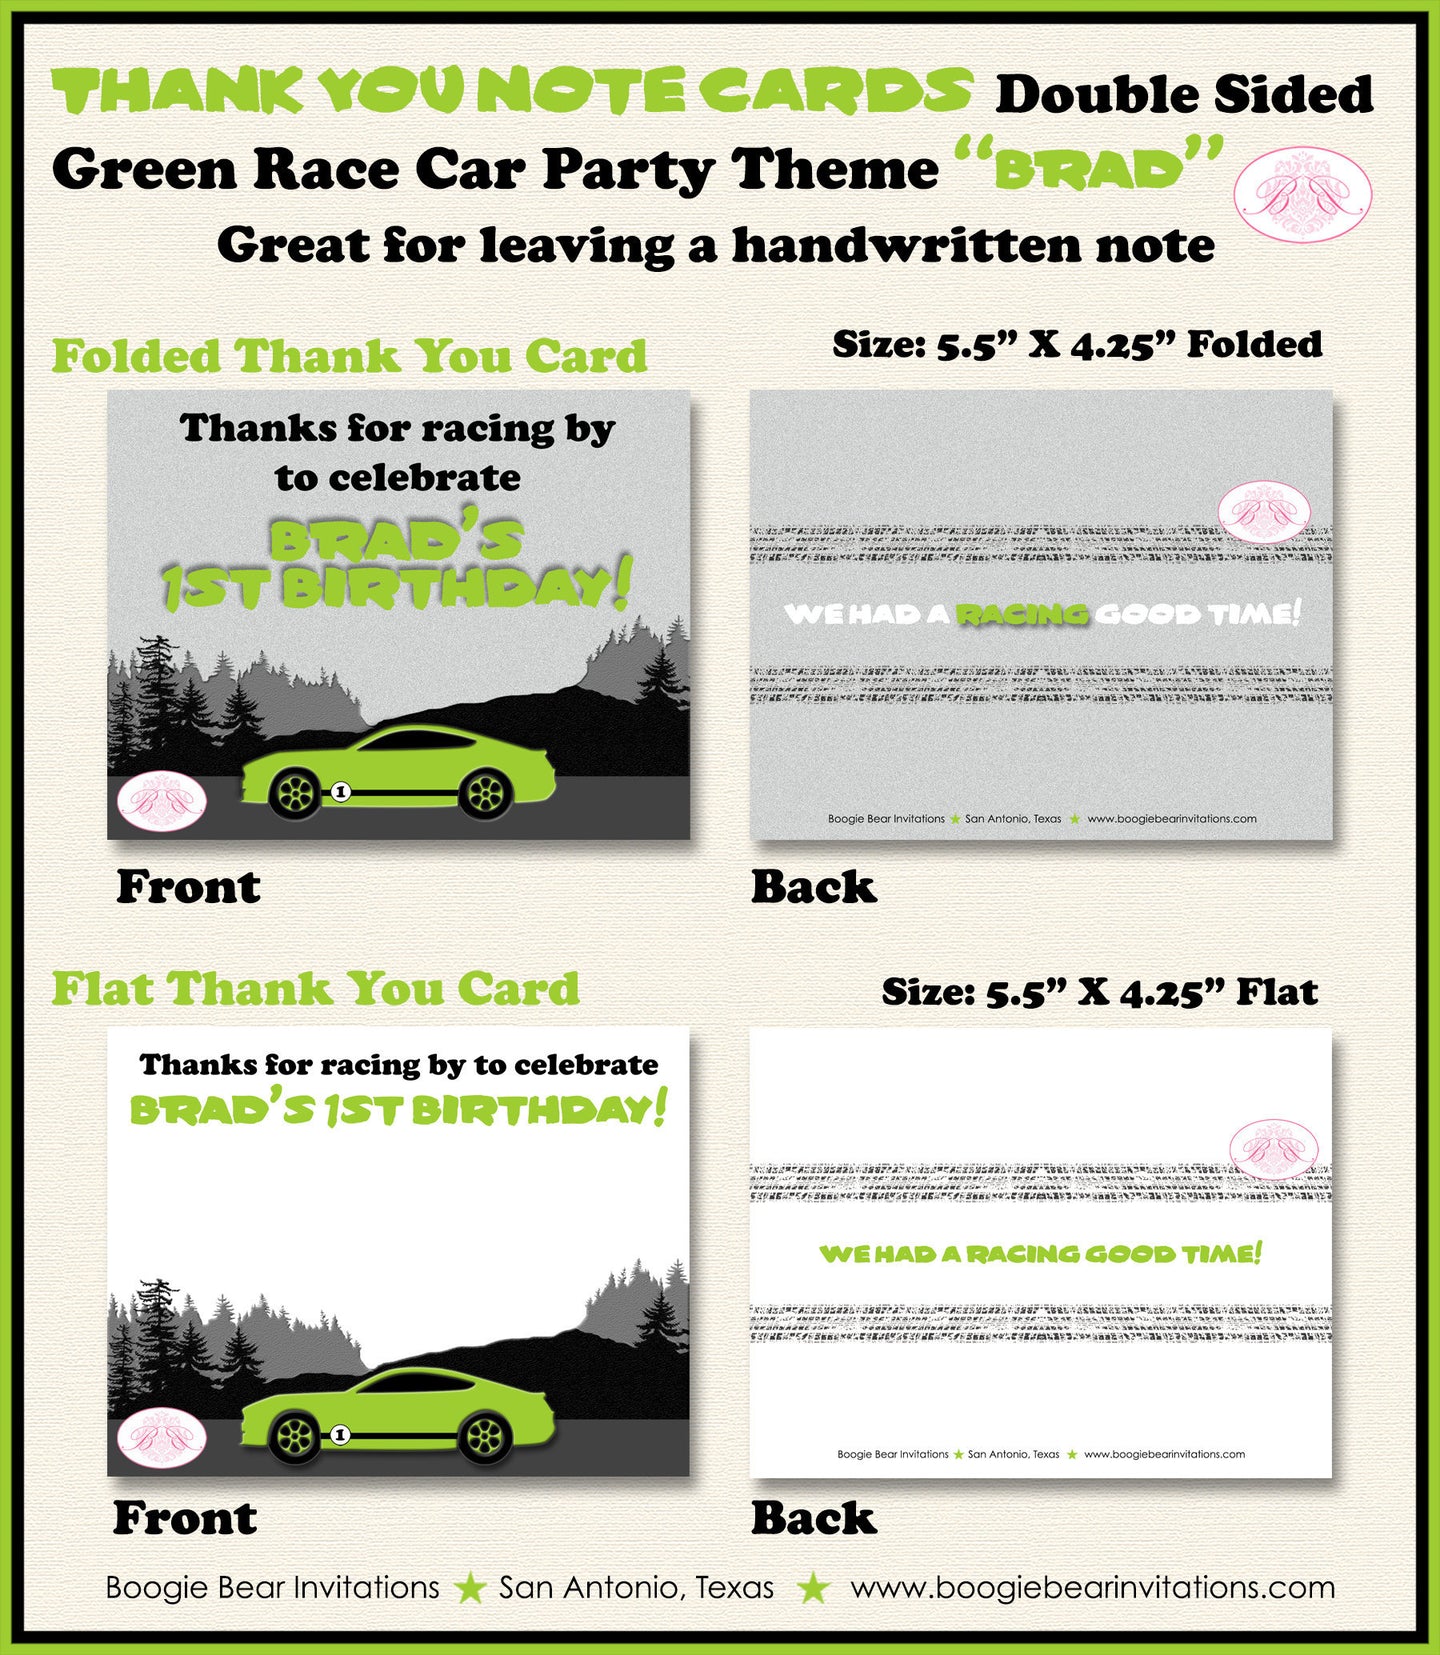 Green Race Car Birthday Party Thank You Card Note Circuit Course Sports Coupe Racing Lime Black Boogie Bear Invitations Brad Theme Printed